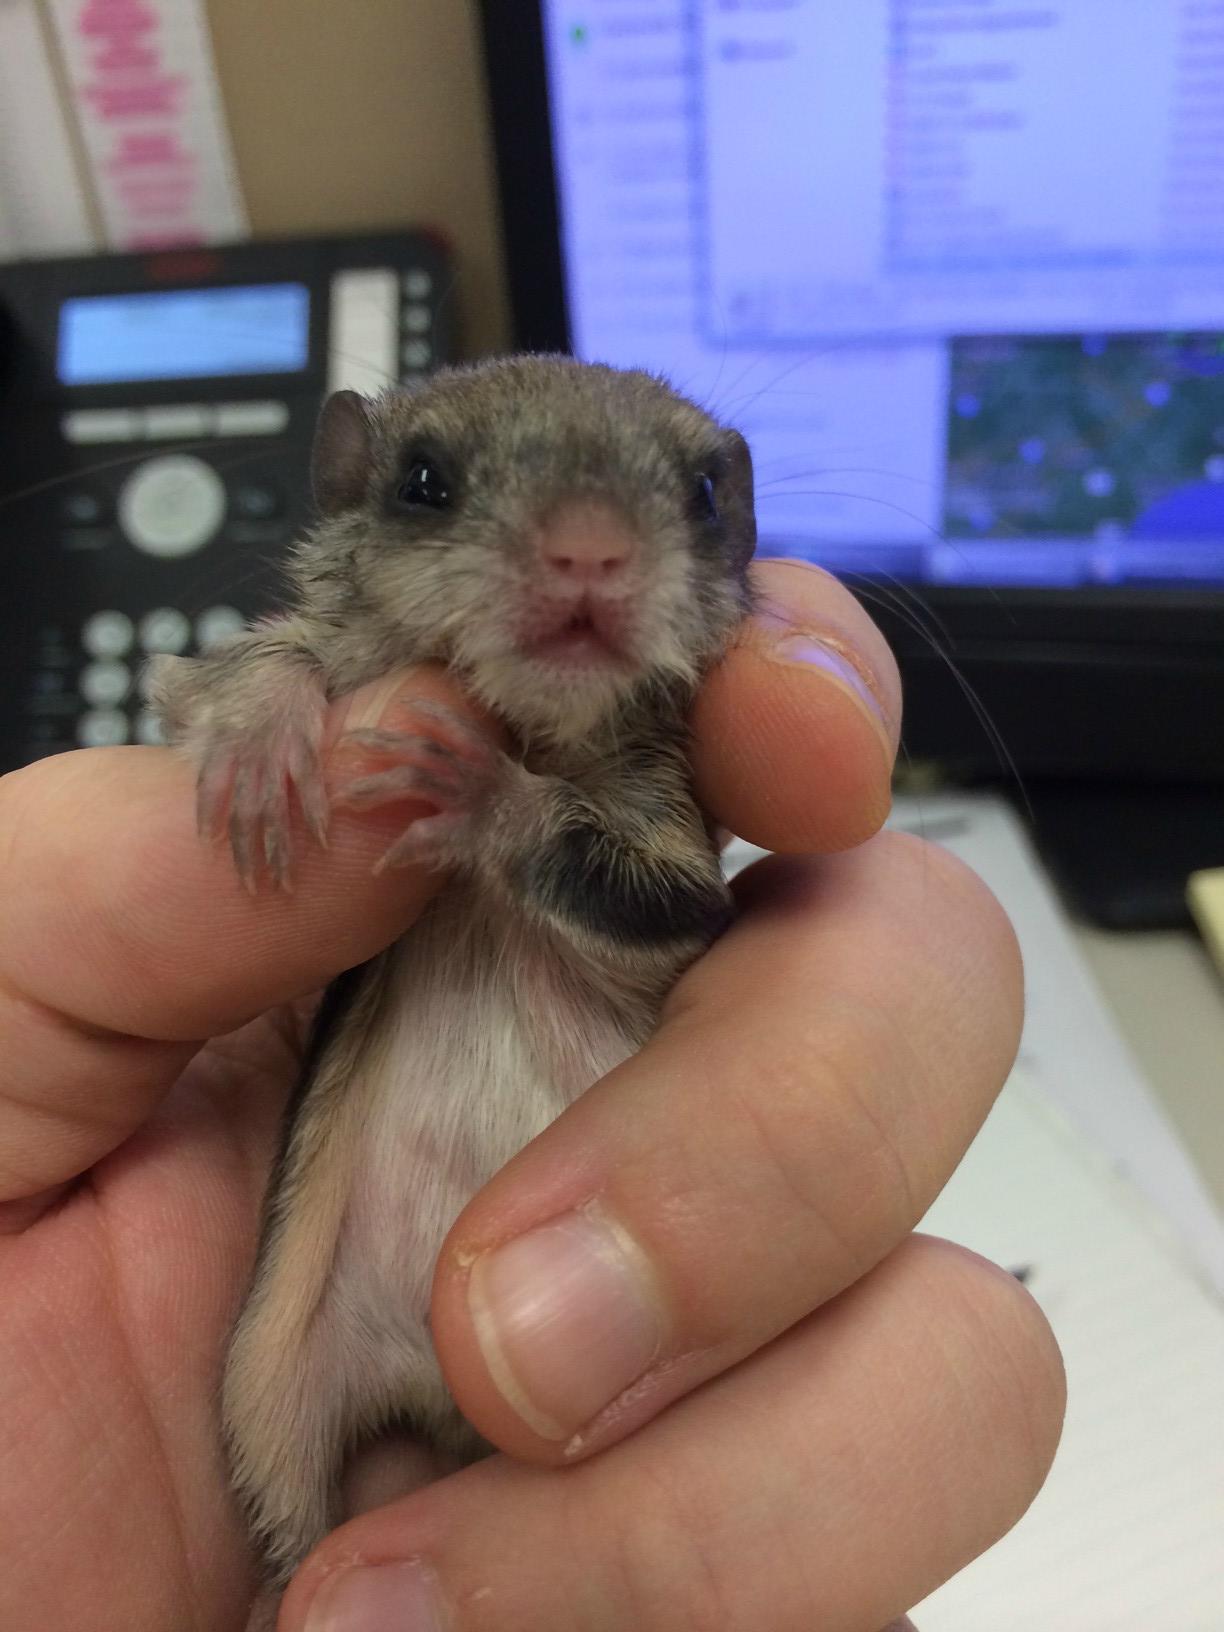 He Found a southern flying squirrel Lying Half Dead and Did the Most amazing thing